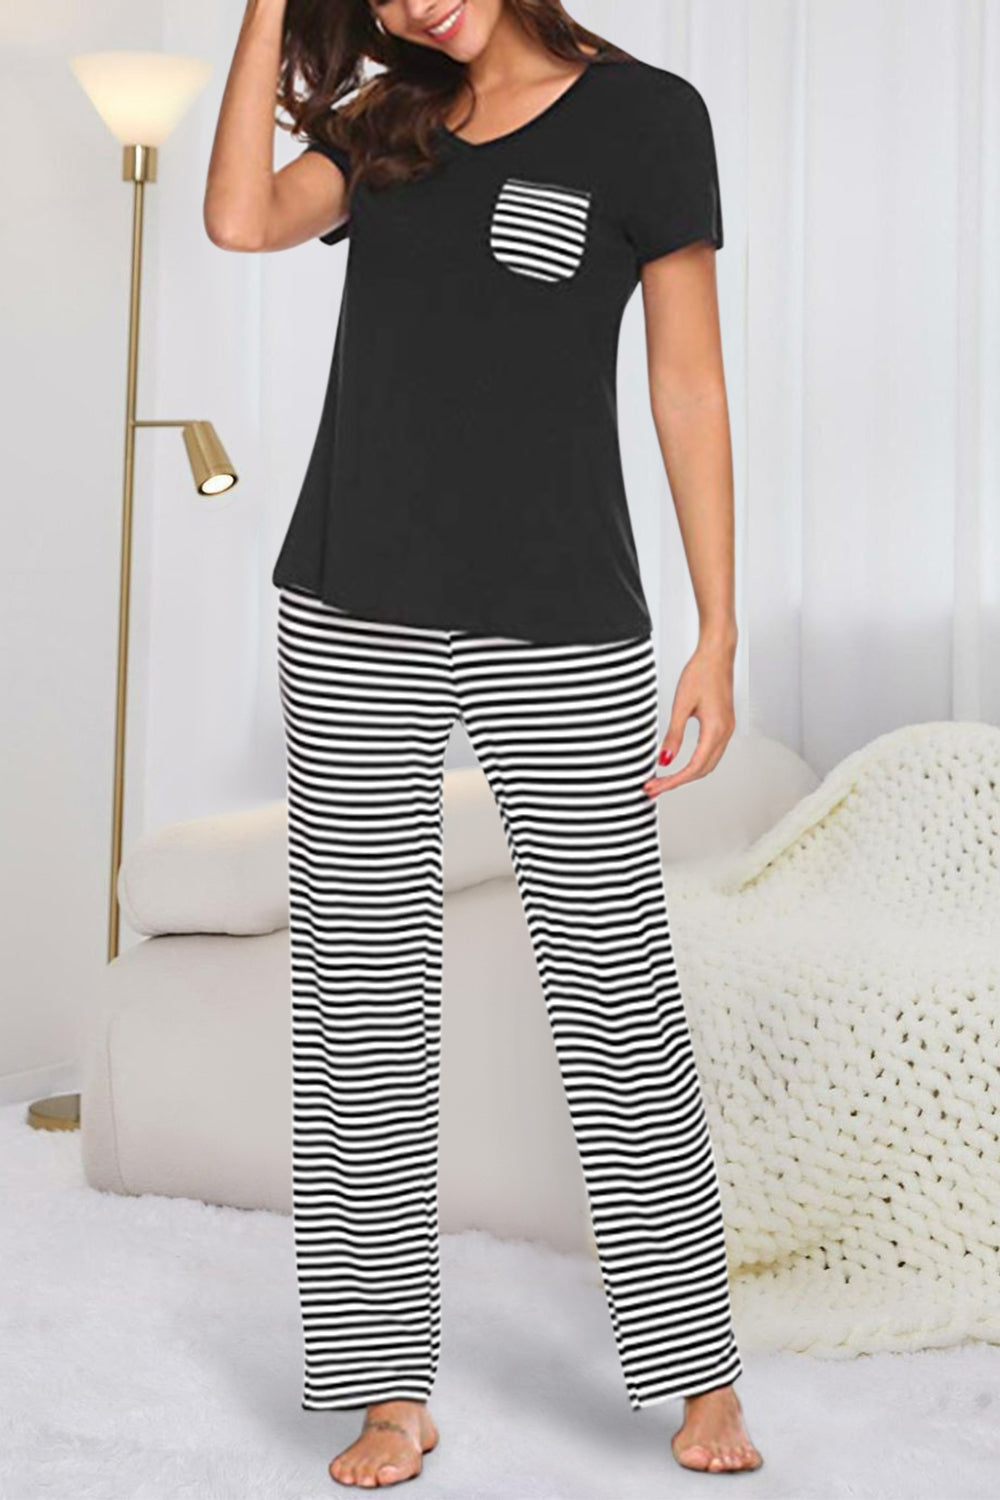 Chic Pocketed Top & Striped Pants Lounge Set for stylish comfort at home or on-the-go. Perfect blend of fashion & ease.